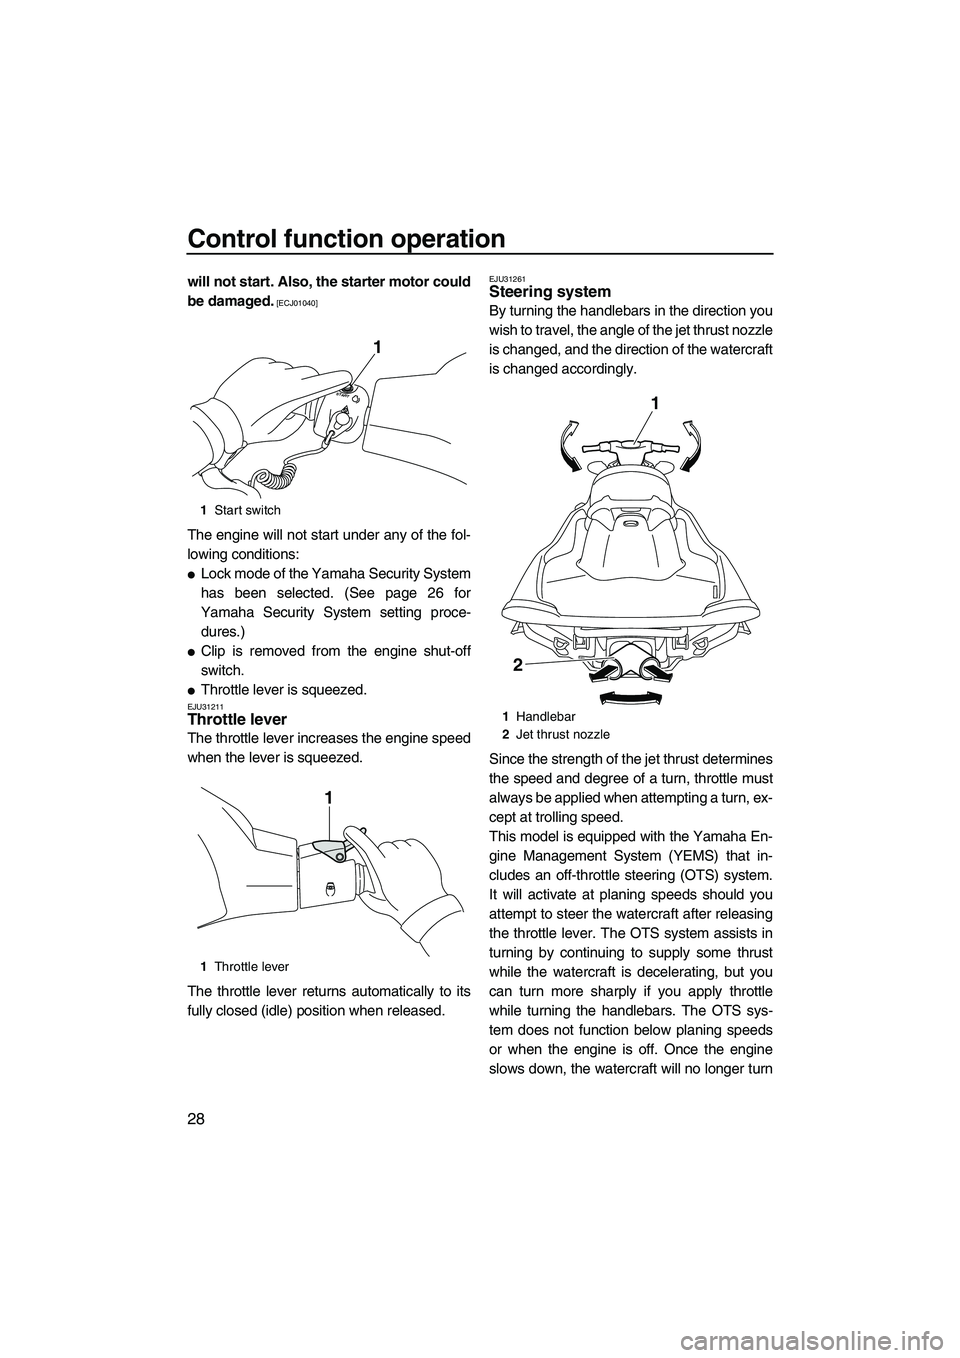 YAMAHA VXS 2012 Owners Guide Control function operation
28
will not start. Also, the starter motor could
be damaged.
 [ECJ01040]
The engine will not start under any of the fol-
lowing conditions:
Lock mode of the Yamaha Security